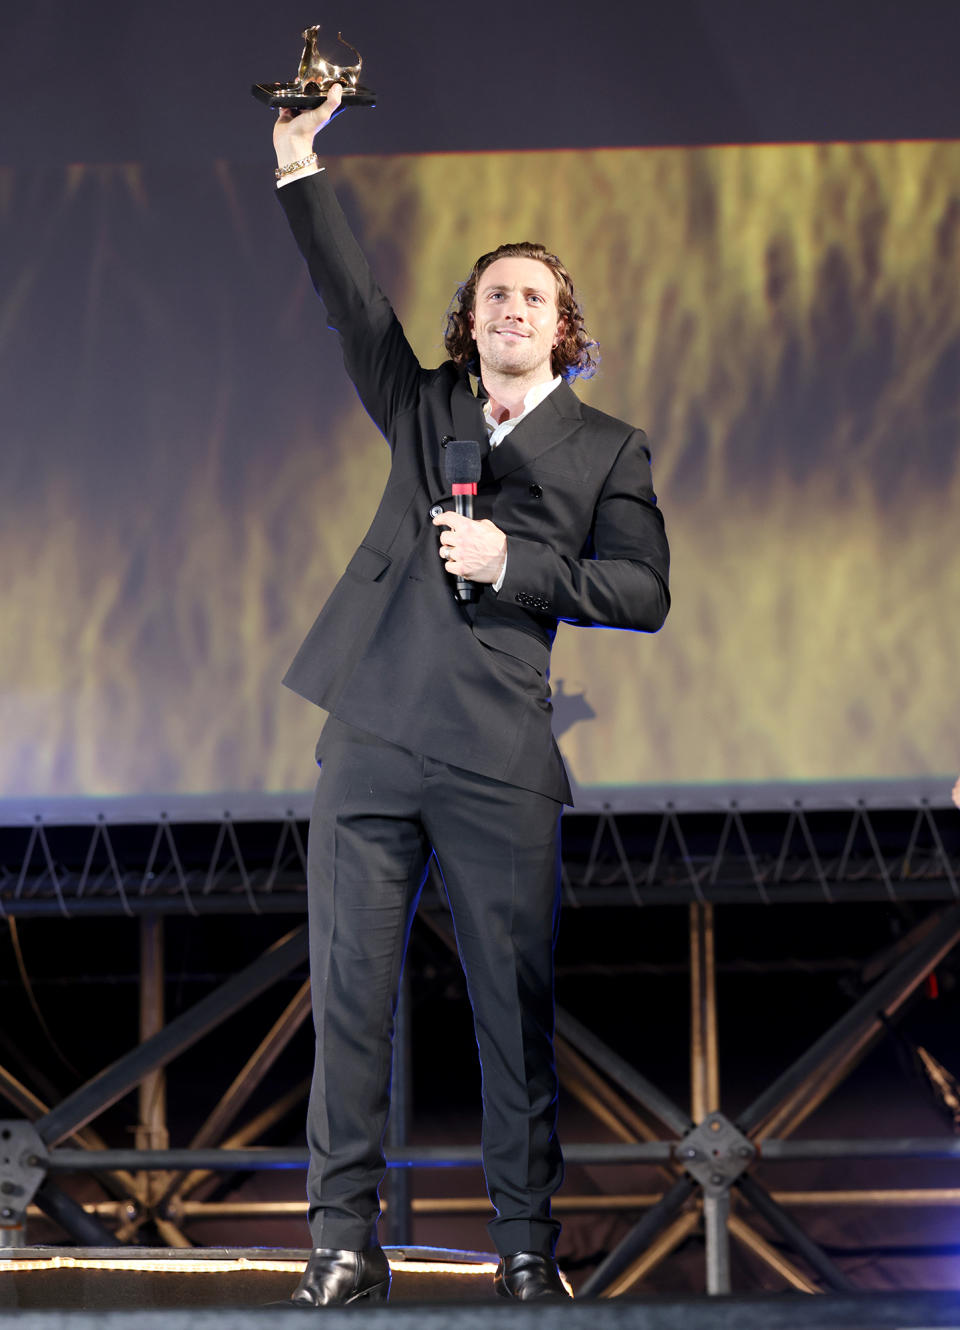 <p>Aaron Taylor-Johnson speaks on stage during the Davide Campari Excellence Award Winner ceremony at the 2022 Locarno Film Festival in Switzerland on Aug. 3.</p>